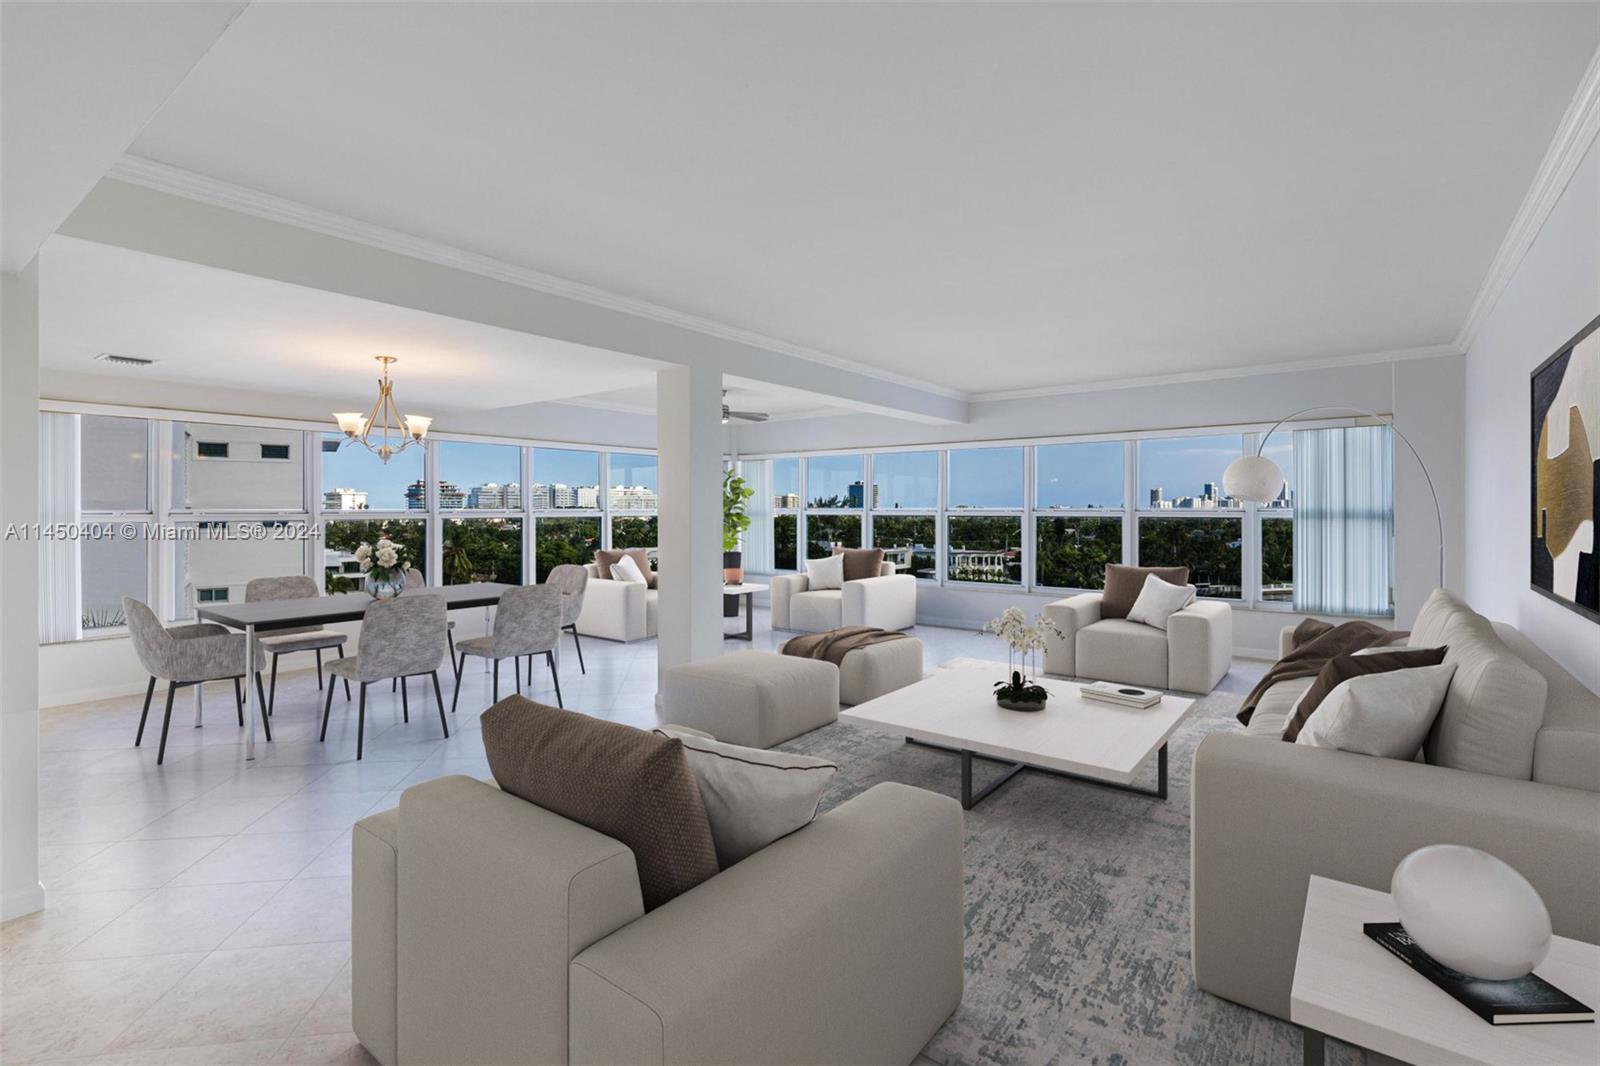 MOTIVATED SELLER brings MAJOR PRICE ADJUSTMENT

Radiant water/sky-line/golf course views from this 1,770 SF 2/2.5 unit at Blair House, a waterfront icon on the southernmost point of the island. Wide open floor plan, showered w/natural light; 9' ceilings; and blank canvas, enabling the creation of a new comfort zone— your home.

Designed by Herbert Matthes in 1959, BH exemplifies MiMo architecture at its finest, exuding the glamour/fun of the era. Owners are modernizing/moving building forward functionally while sustaining its heritage & creative integrity.

50-Year Cert done; Reserve Fund solid. HOA pays A/C= $30 electric bill.

Walkability score=10
Steps to worship houses, kid/dog parks, beach, business districts, Bal Harbour Shops.